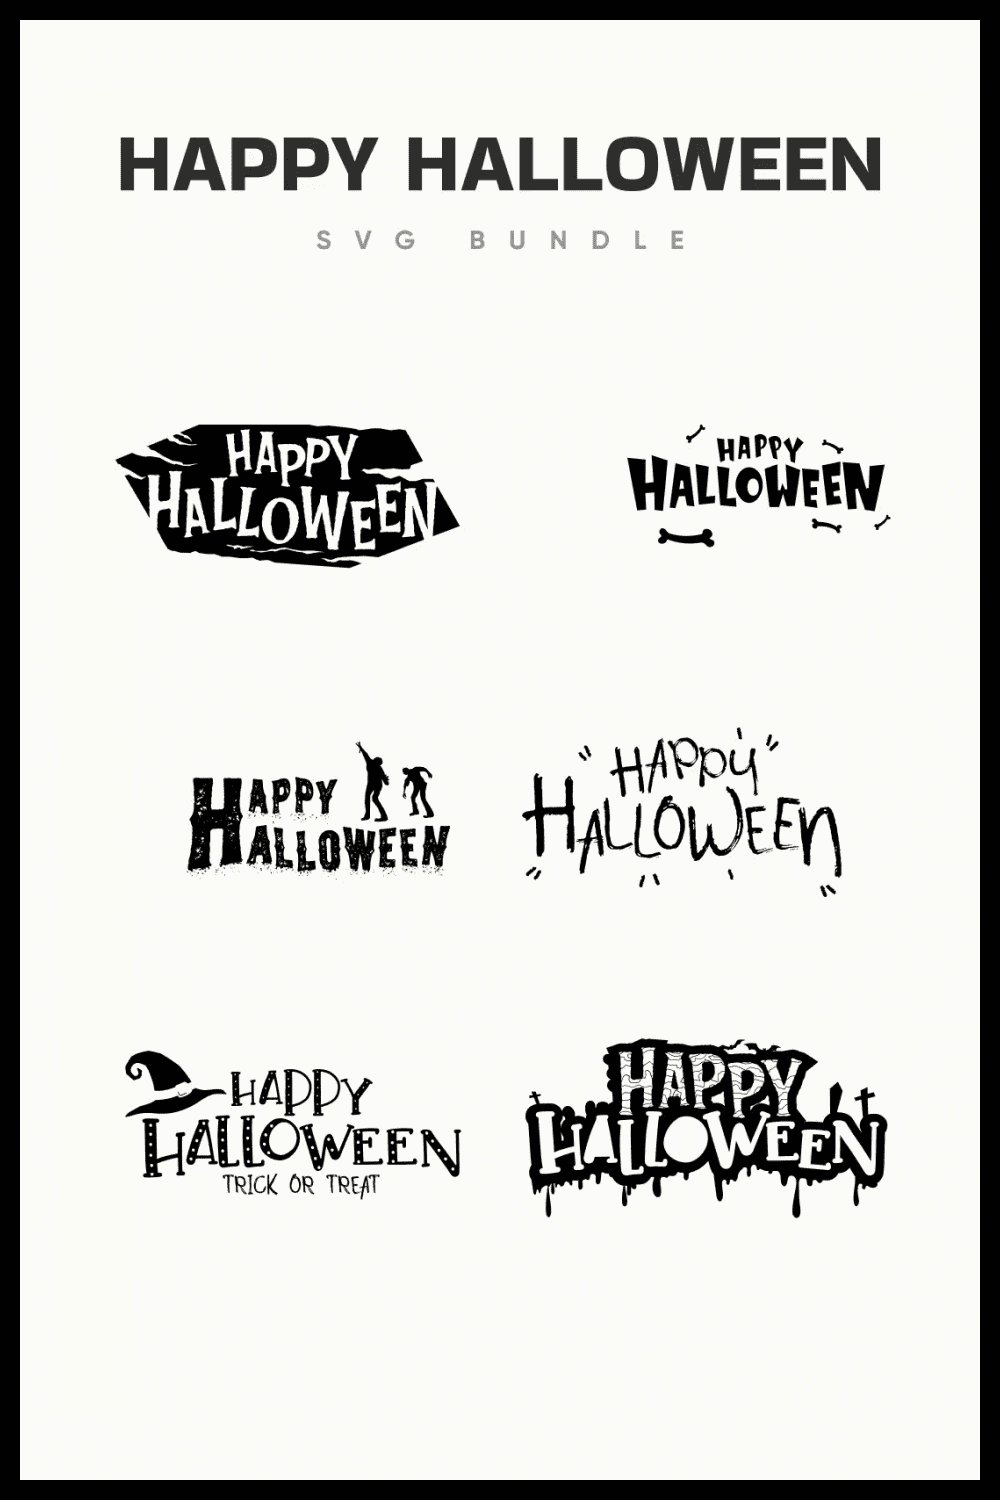 Collage of various versions of the inscription Happy Halloween.